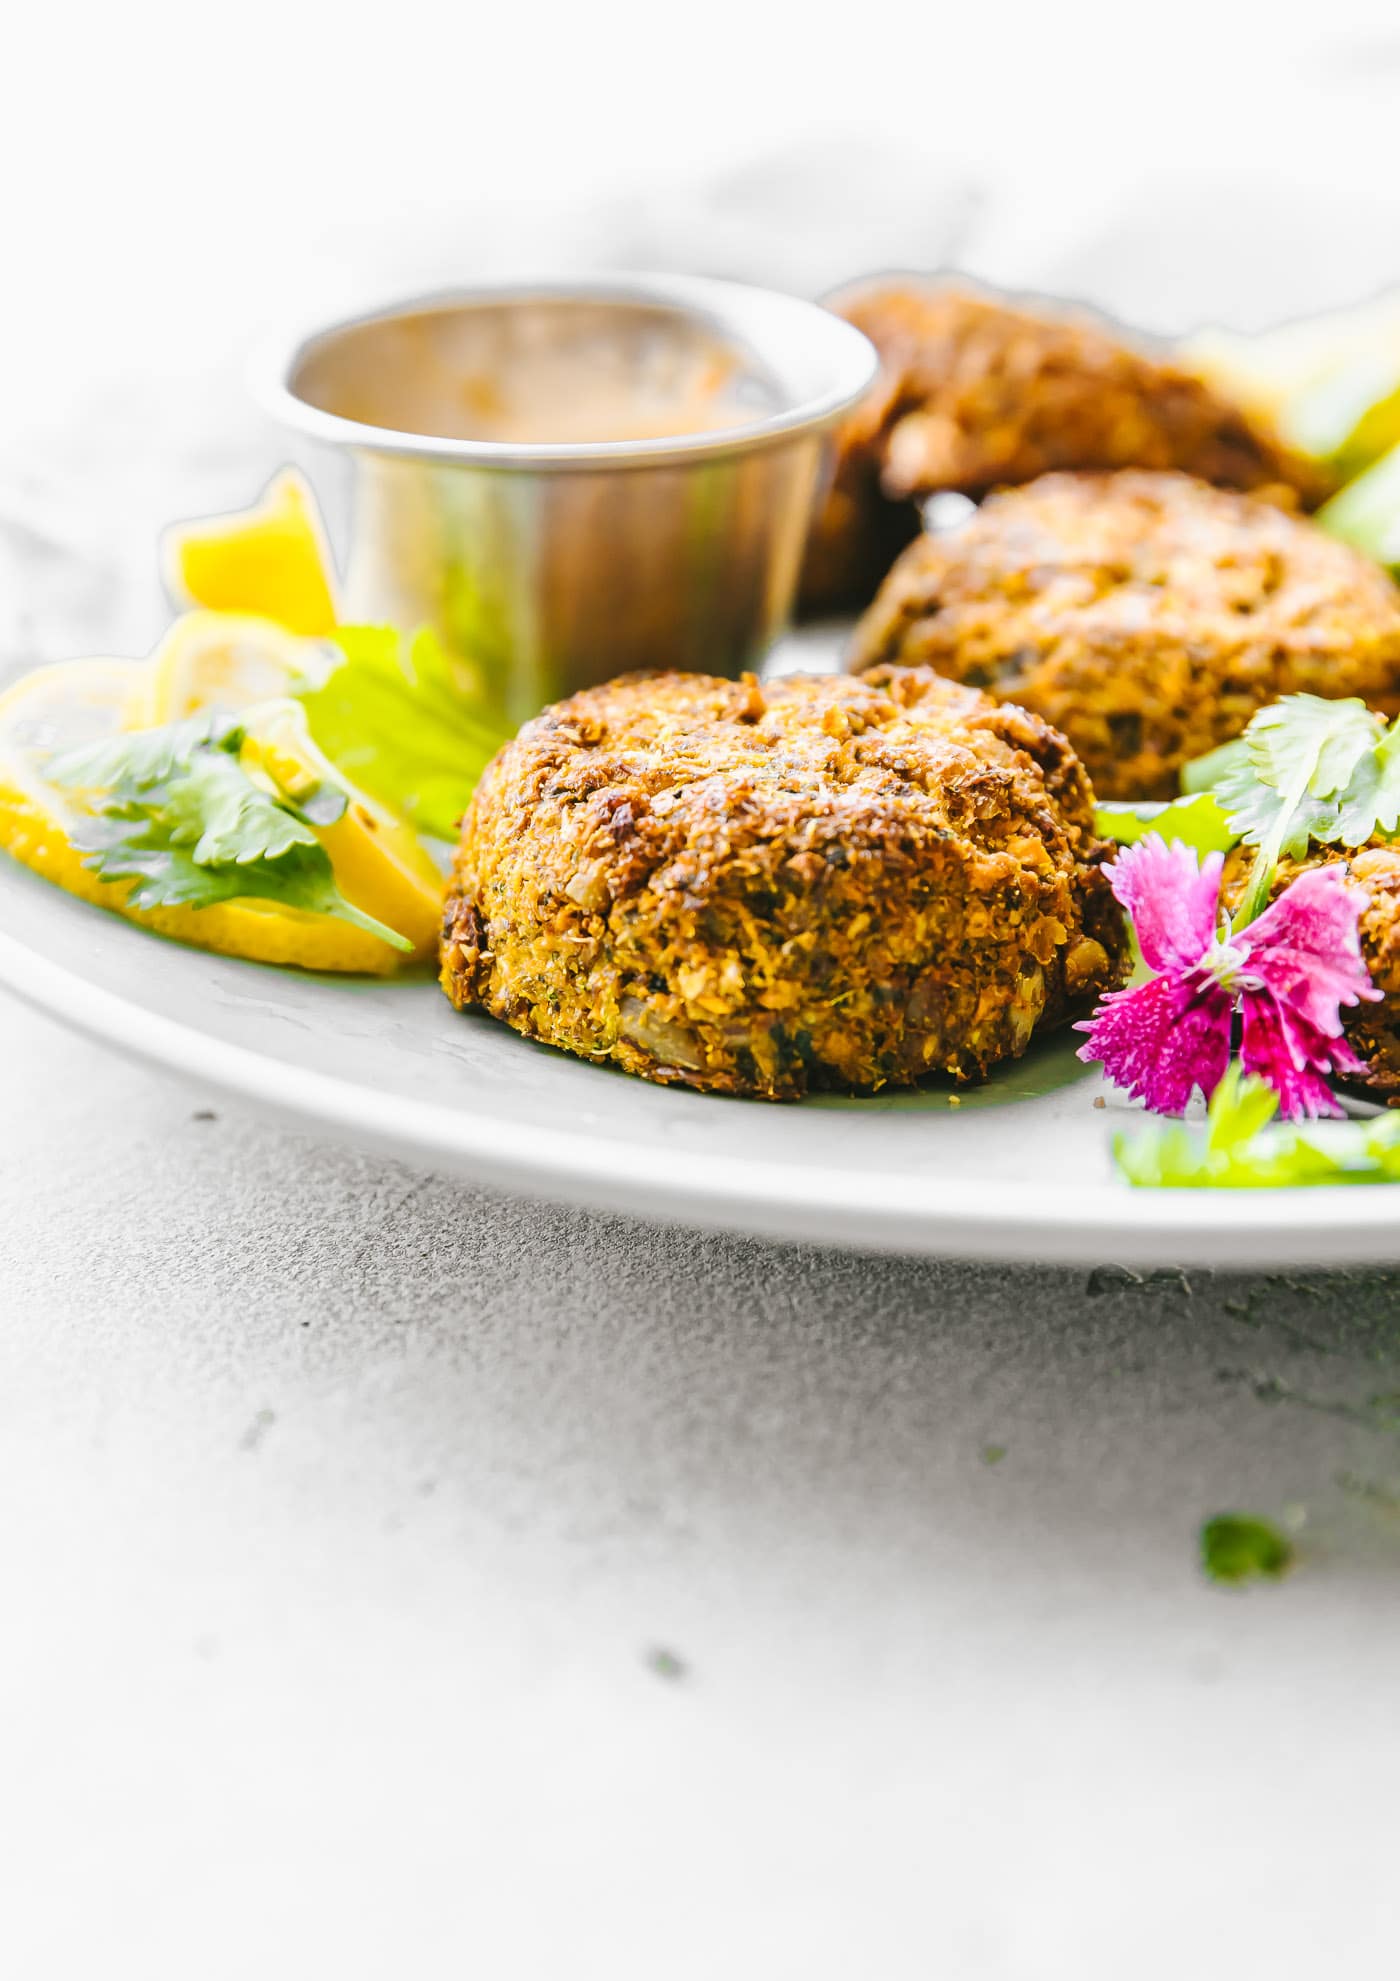 Cilantro Ranch Sweet Potato Cauliflower Patties, baked or cooked in air fryer! Cauliflower patties that are delicious, quick, and #healthy! No eggs needed. #vegetarian #paleo {permalink}